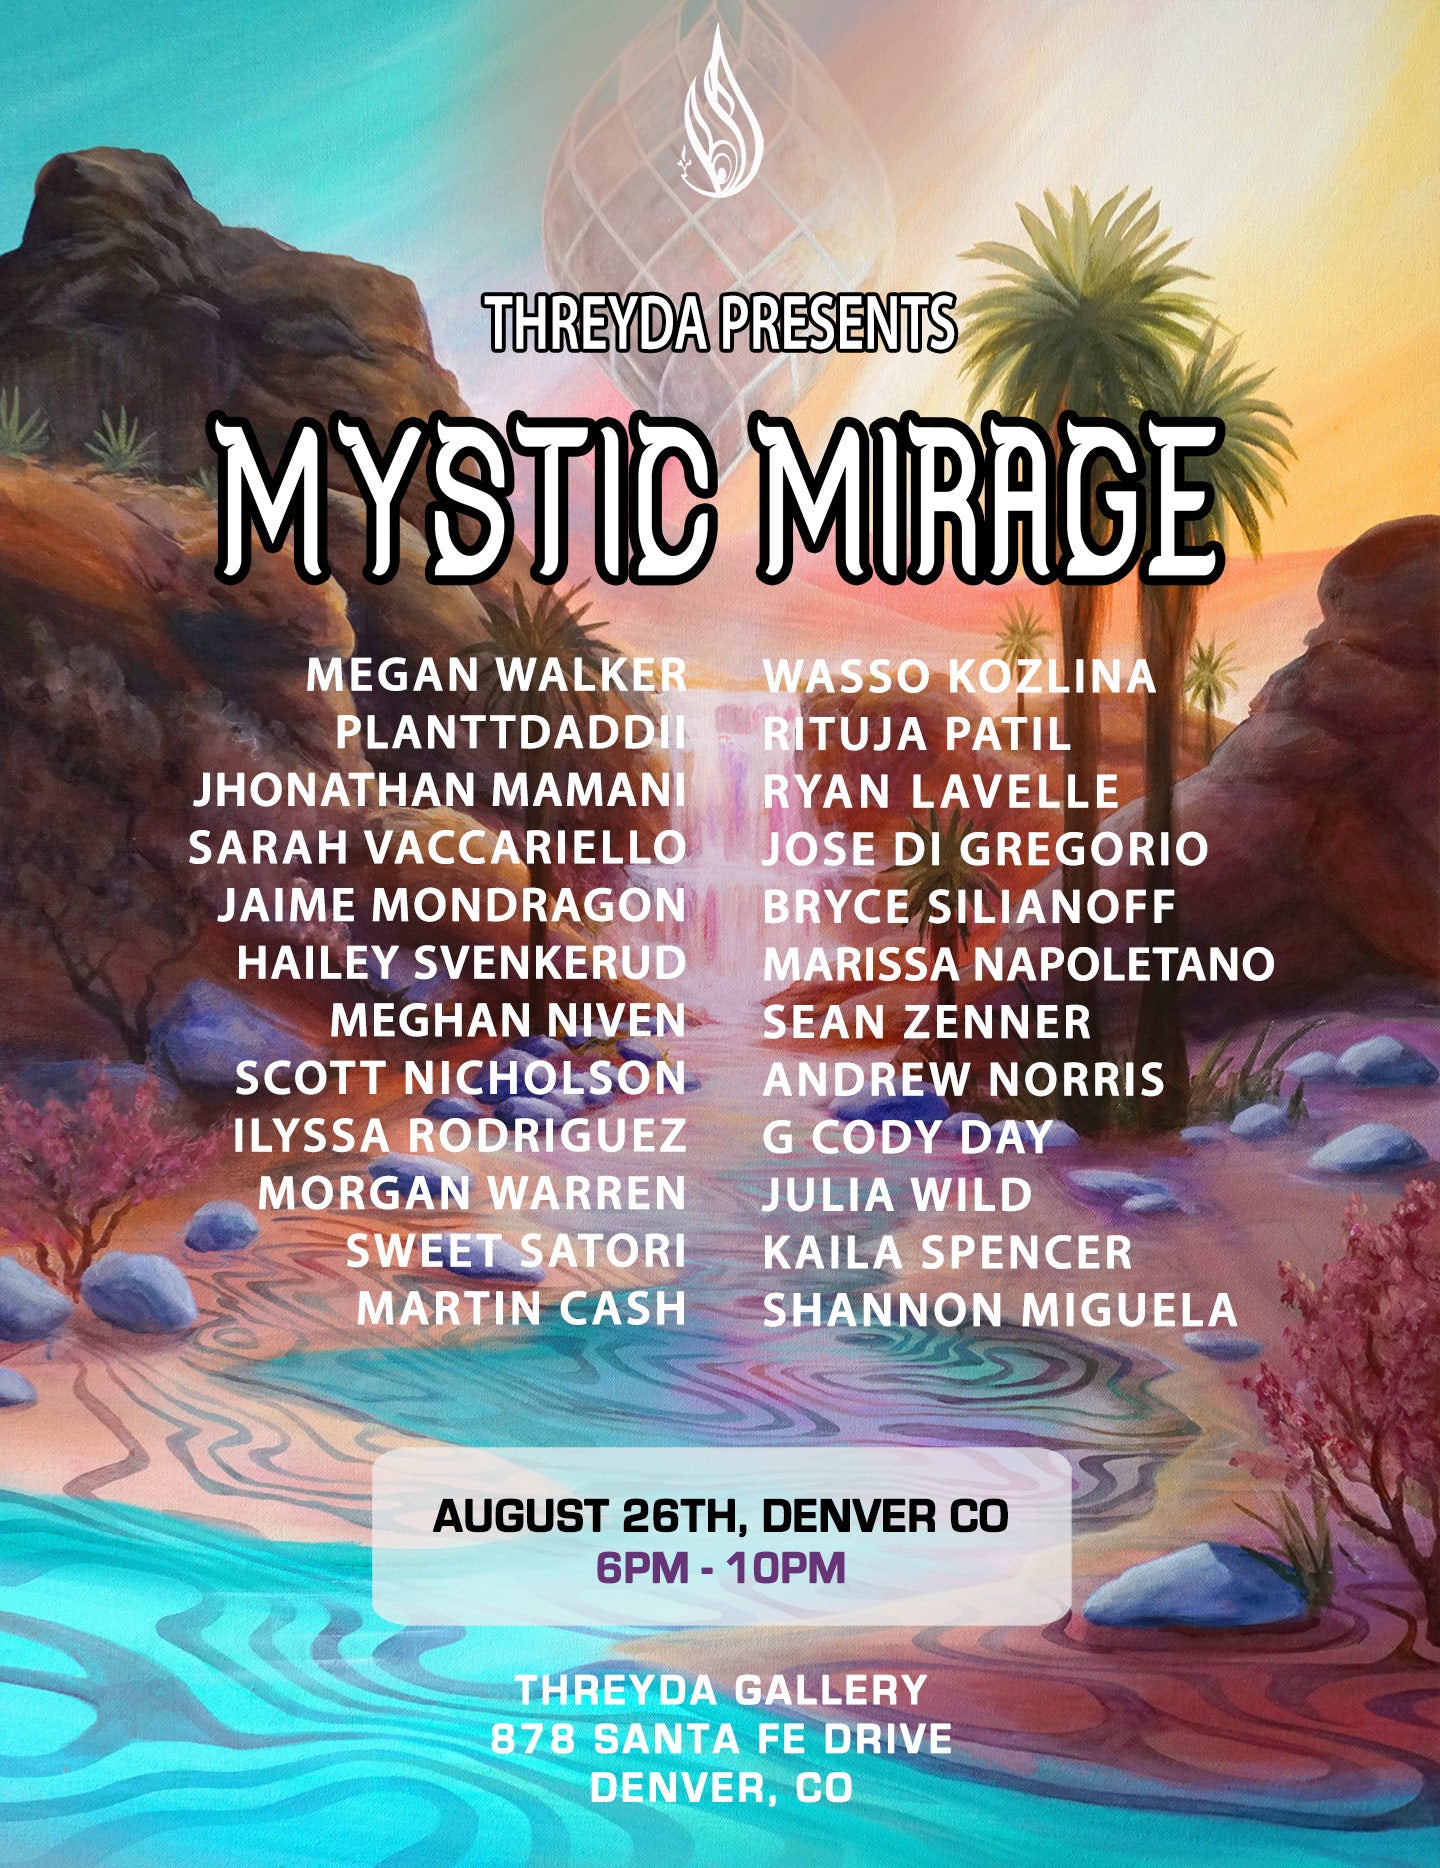 Mystic Mirage Event Ticket - August 26th, Denver CO